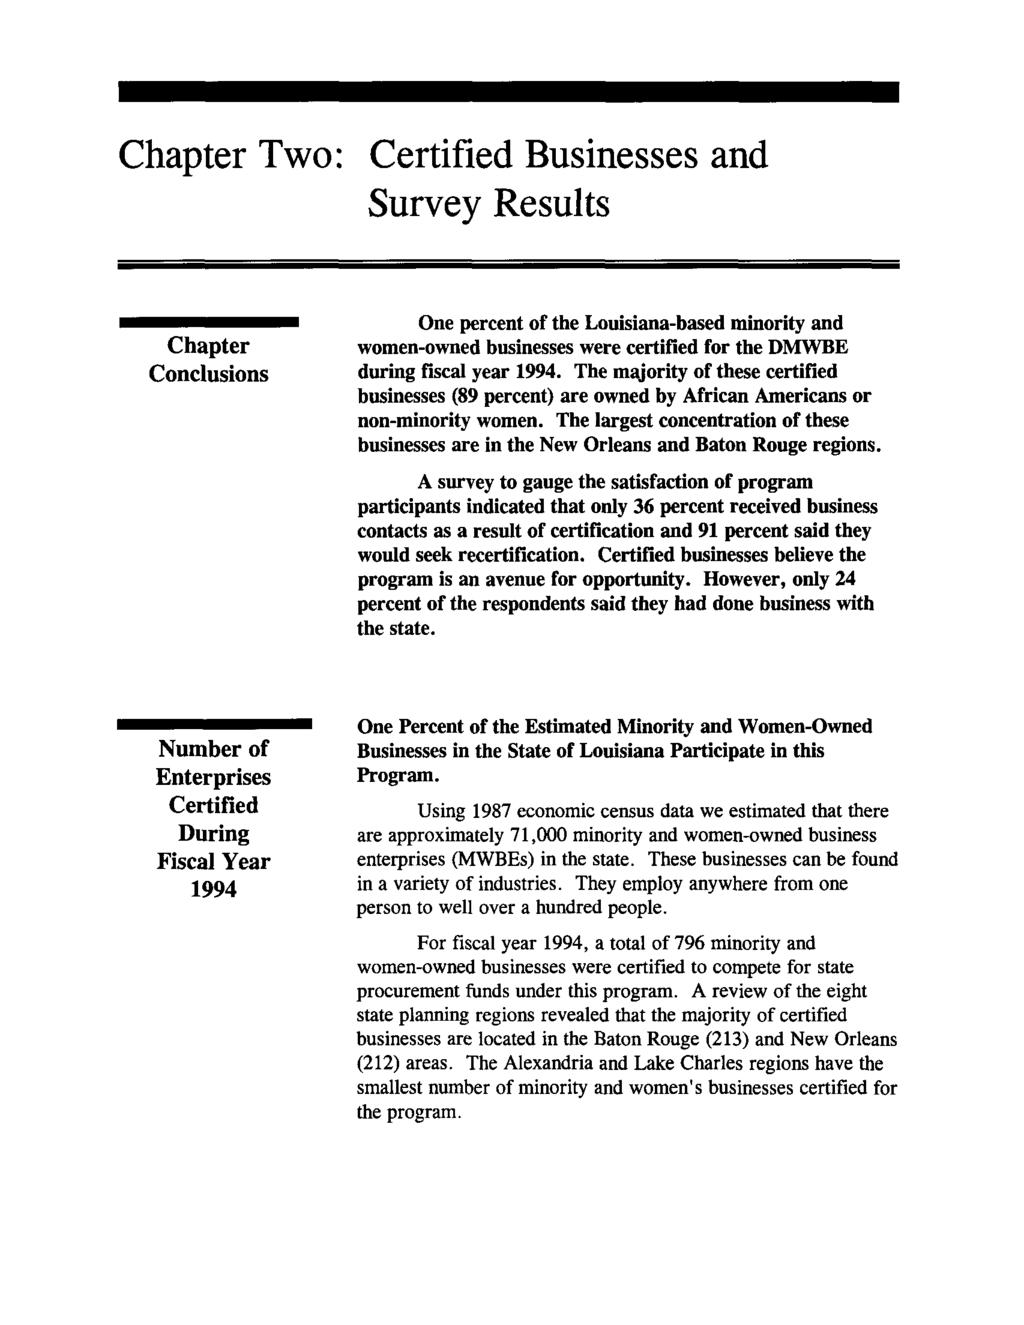 Chapter Two: Certified Businesses and Survey Results Chapter Conclusions One percent of the Louisiana-based minority and women-owned businesses were certified for the DMWBE during fiscal year 1994.